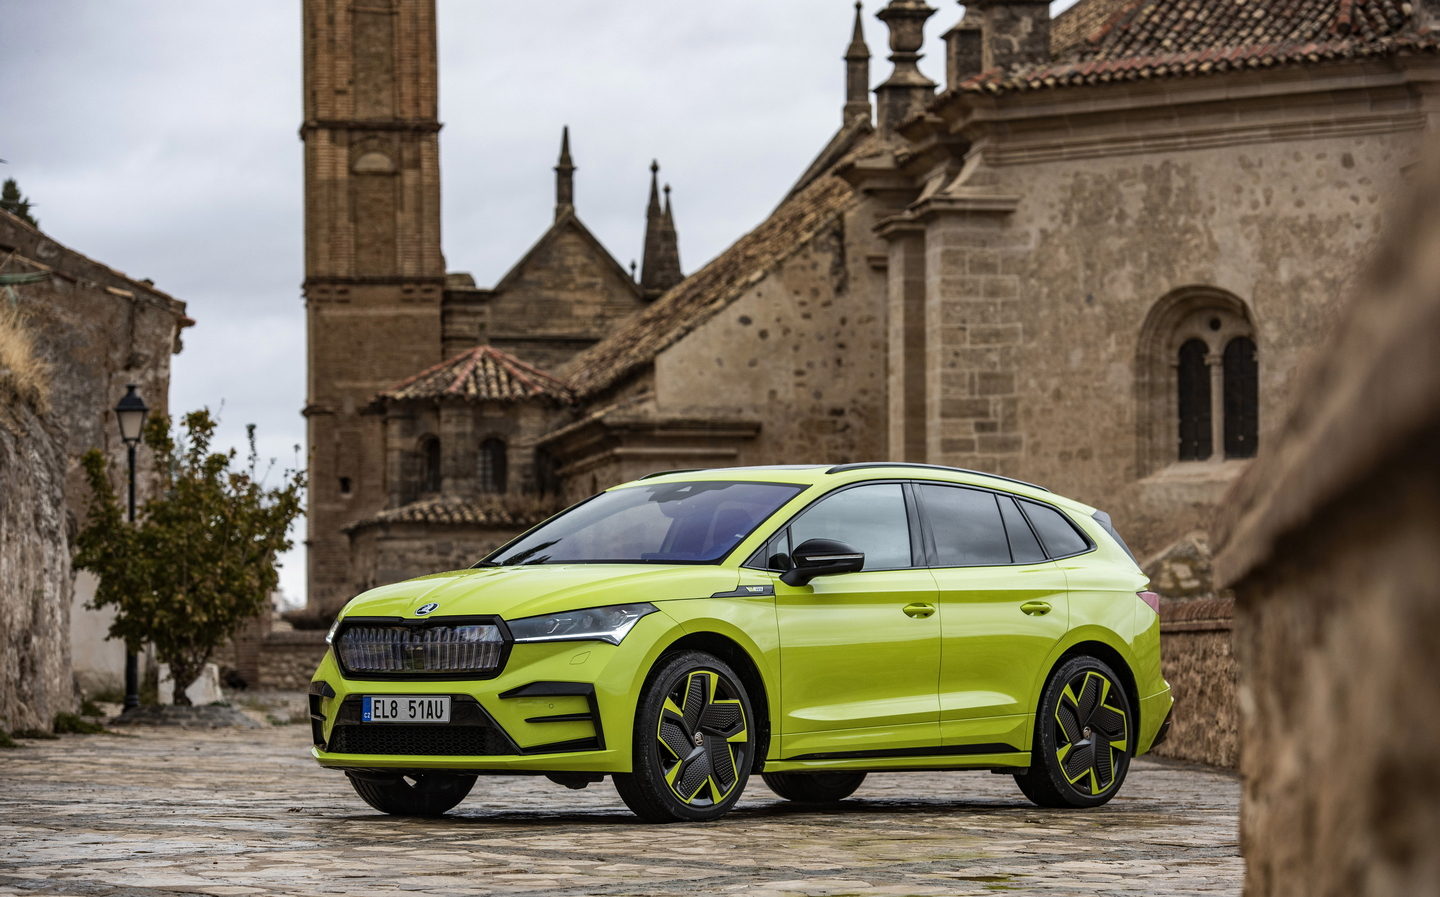 Skoda Enyaq iV vRS 2023 review: The best sporty electric SUV for families?